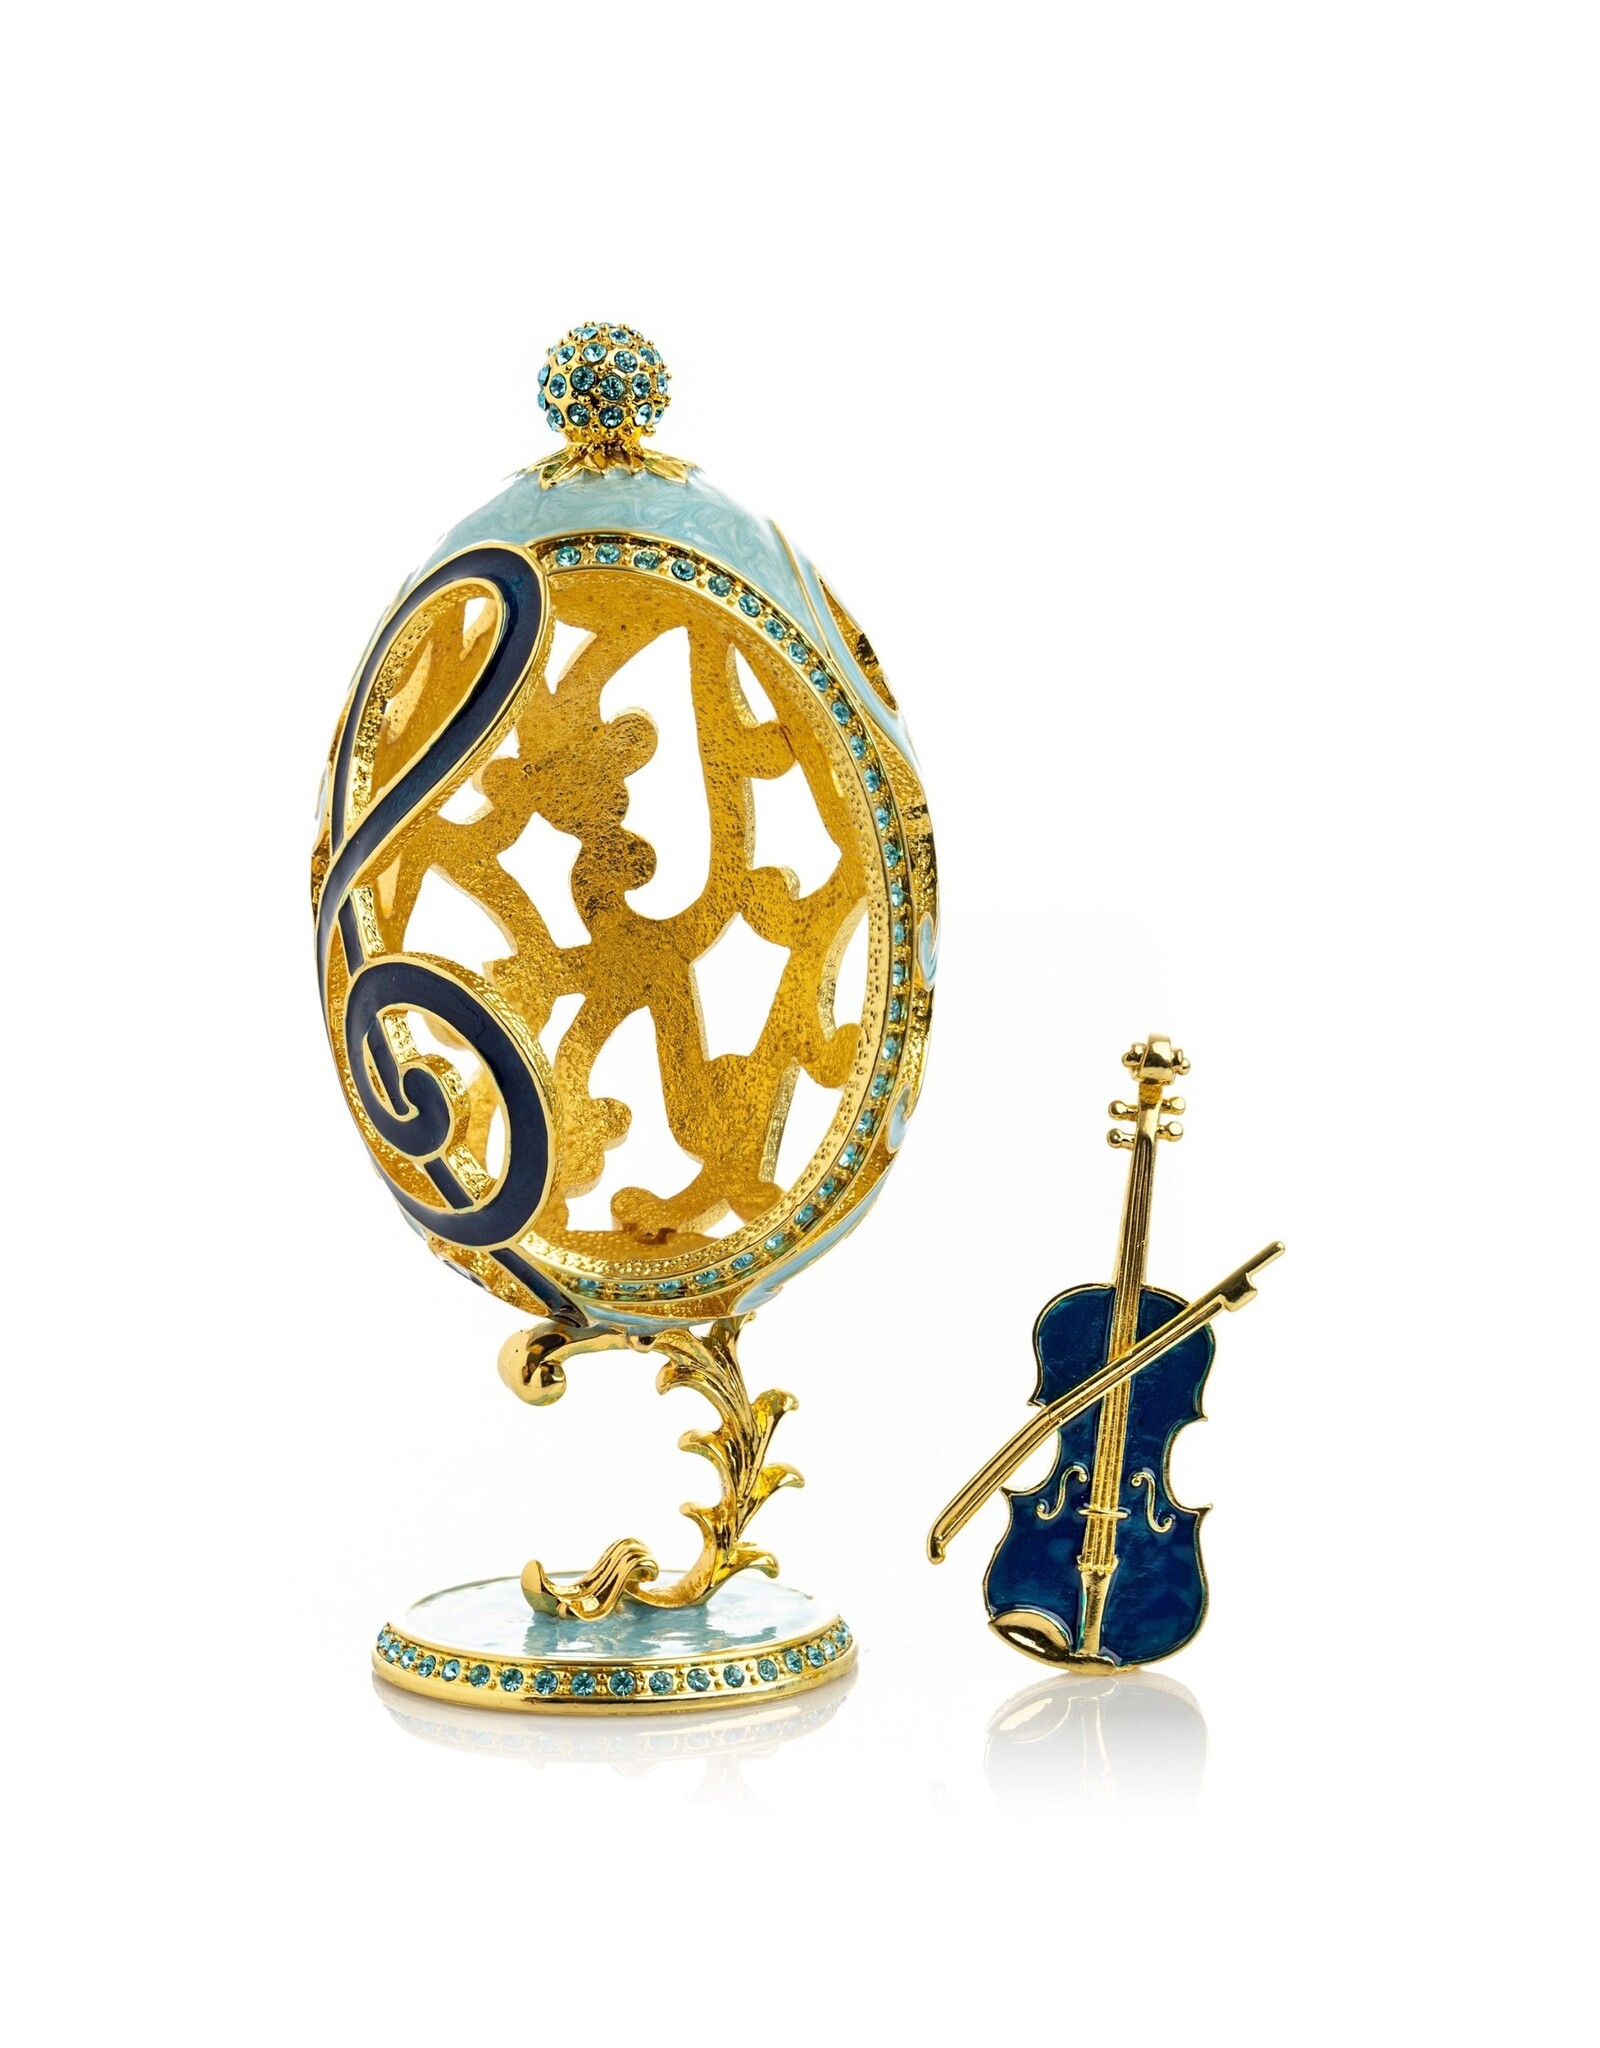 Faerge Inspired Treble Clef Imperial Egg